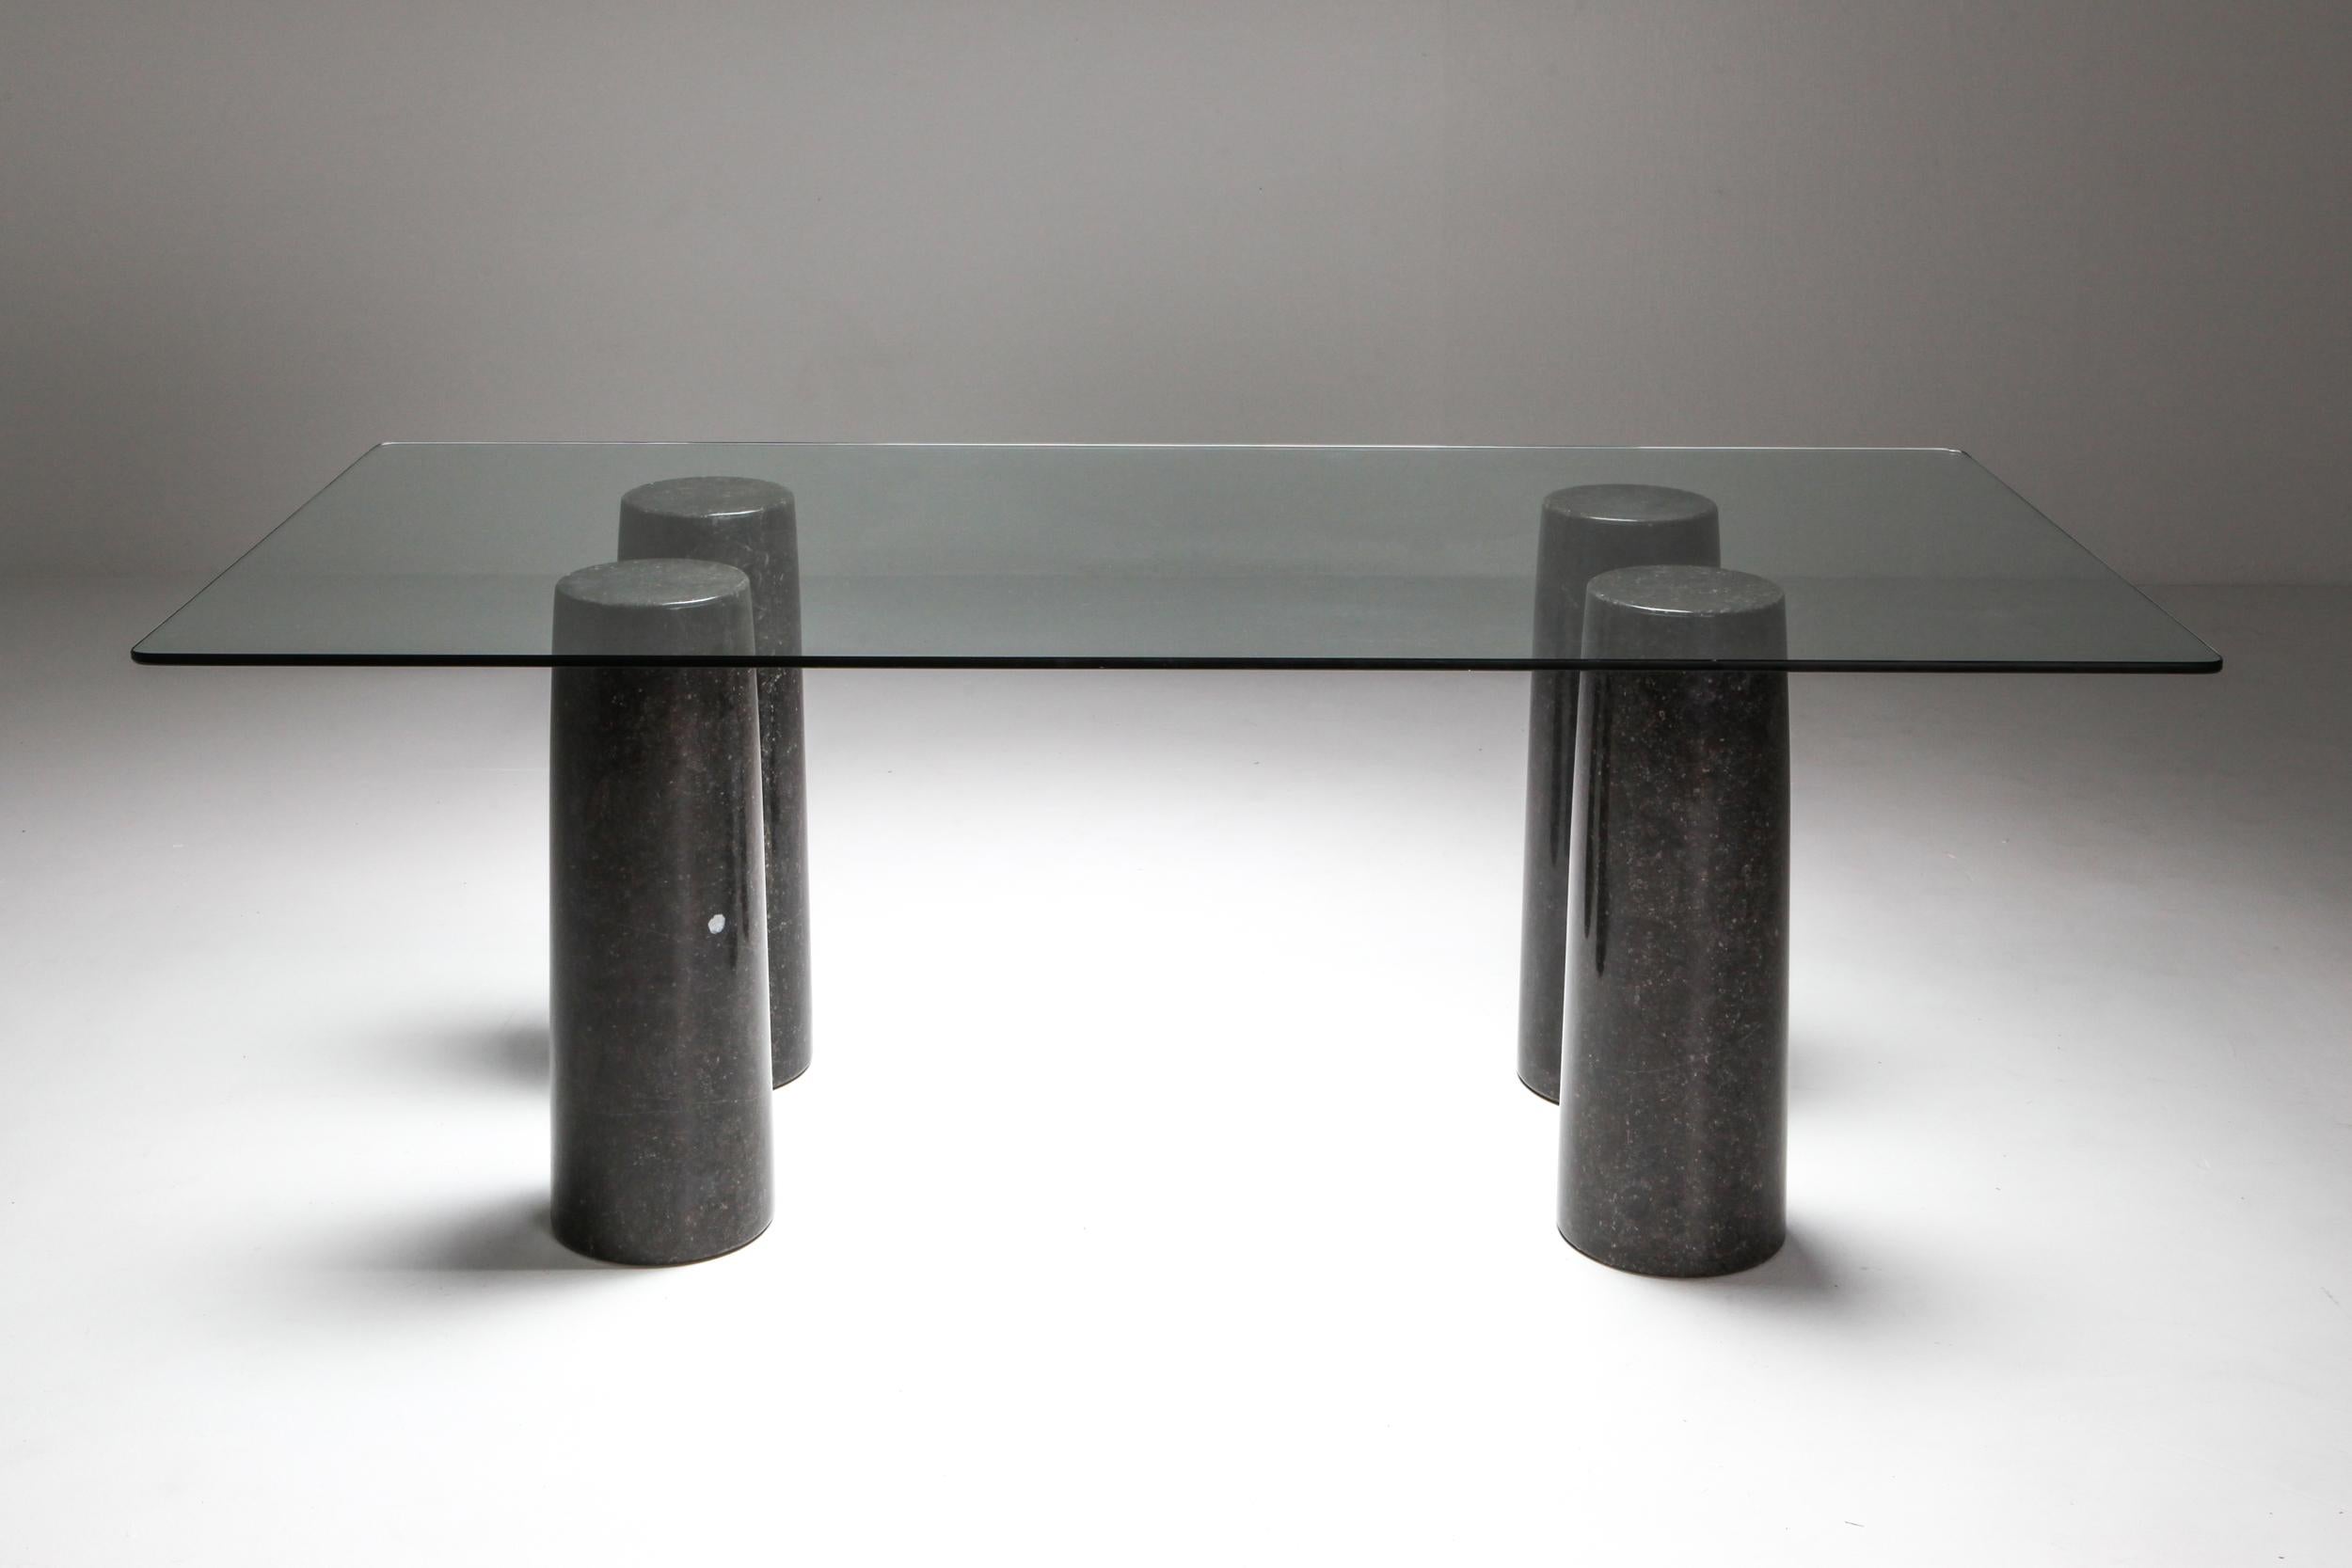 Colonnata black marble dining table, Mario Bellini, Italy, 1970s

Rectangular glass top which could be customized to your desired dimensions.

  

World-renowned architect and designer Mario Bellini has been an influential figure in Italian